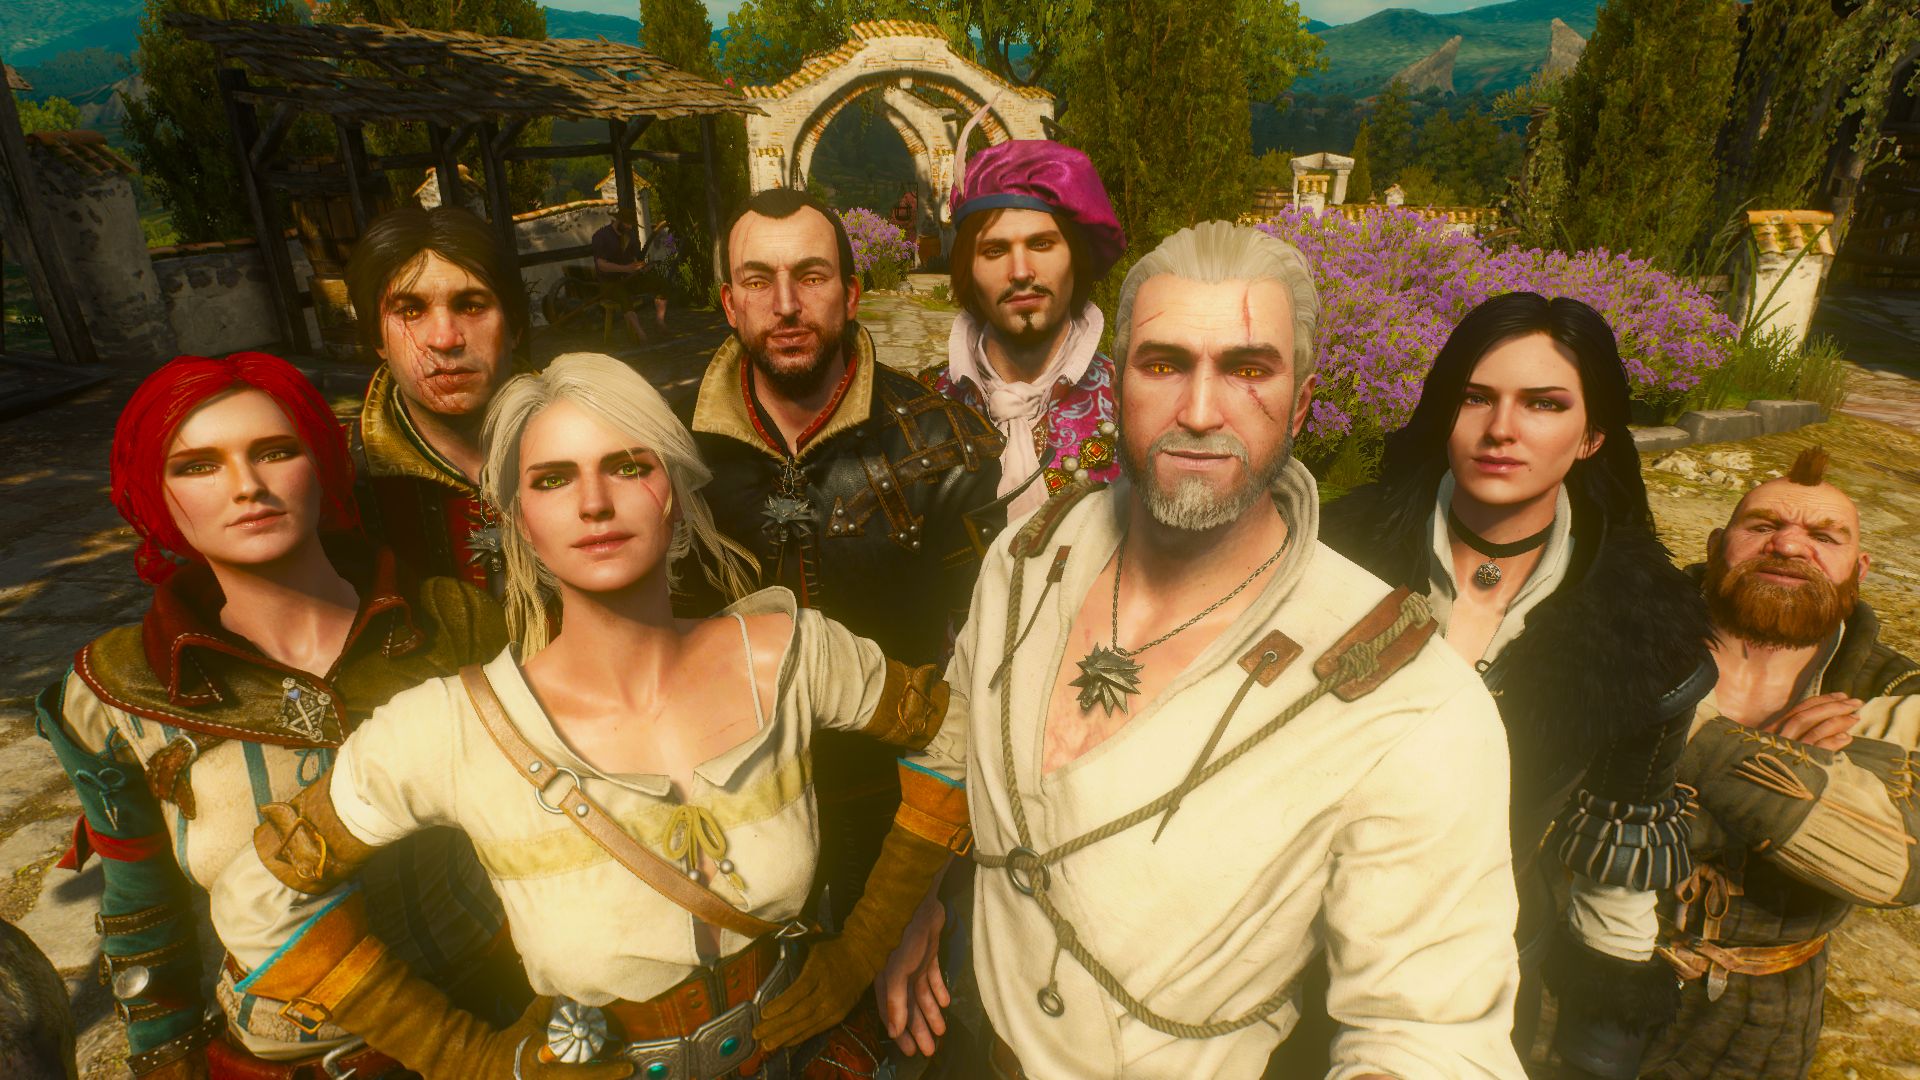 Download background video game, the witcher 3: wild hunt, ciri (the witcher), geralt of rivia, triss merigold, yennefer of vengerberg, the witcher